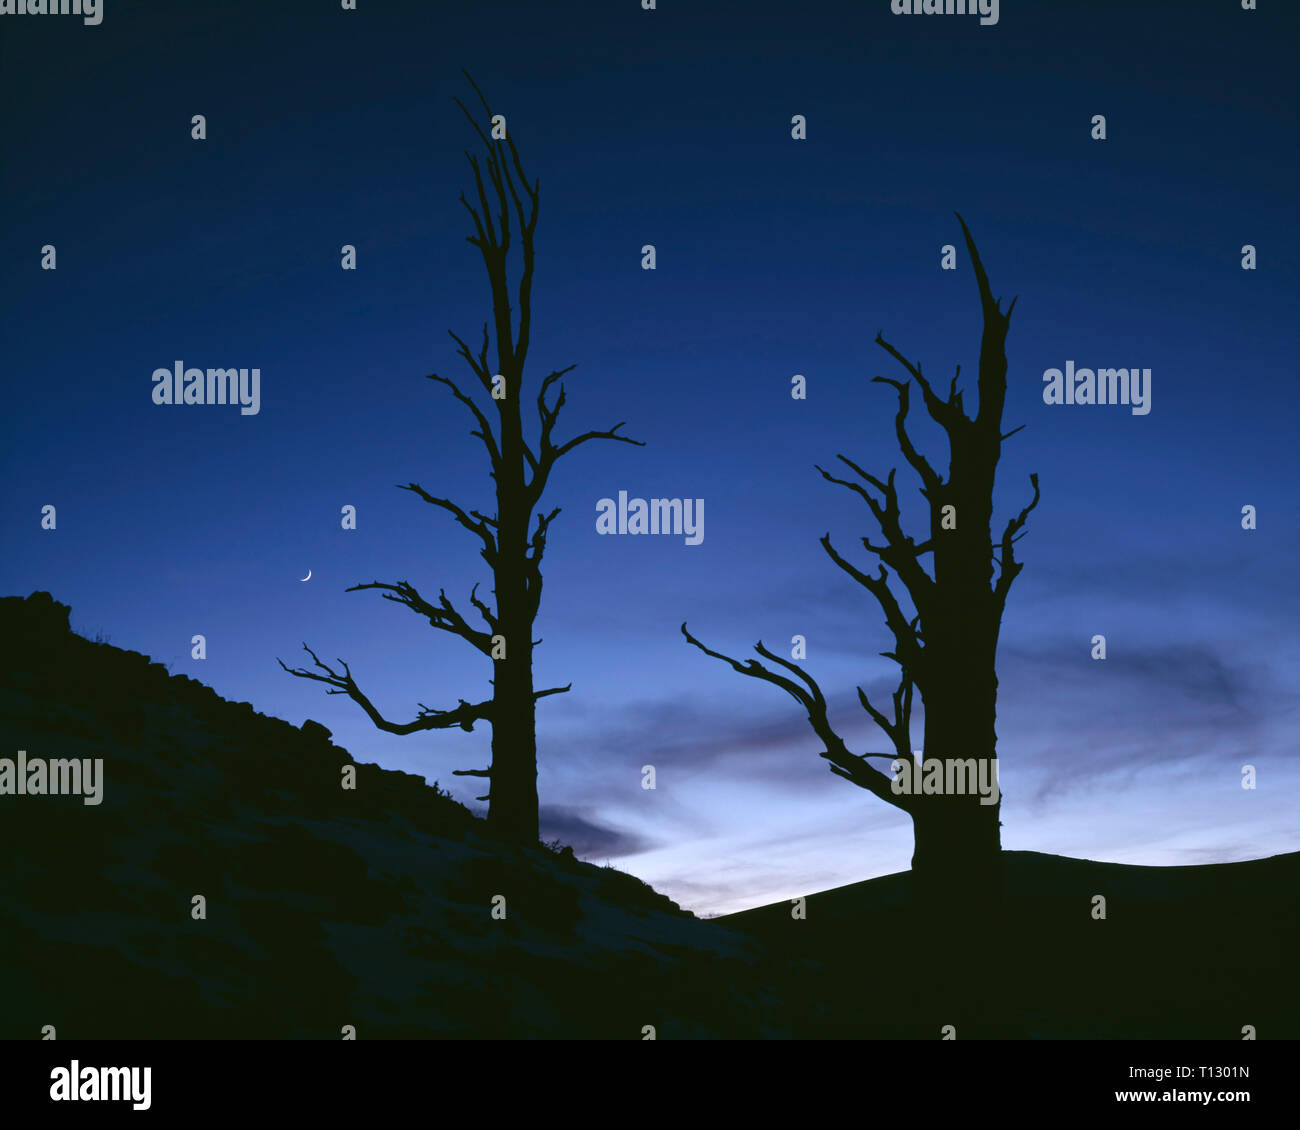 USA, California, Inyo National Forest, Ancient bristlecone pines silhouetted at dusk with crescent moon, Ancient Bristlecone Pine Forest Area. Stock Photo